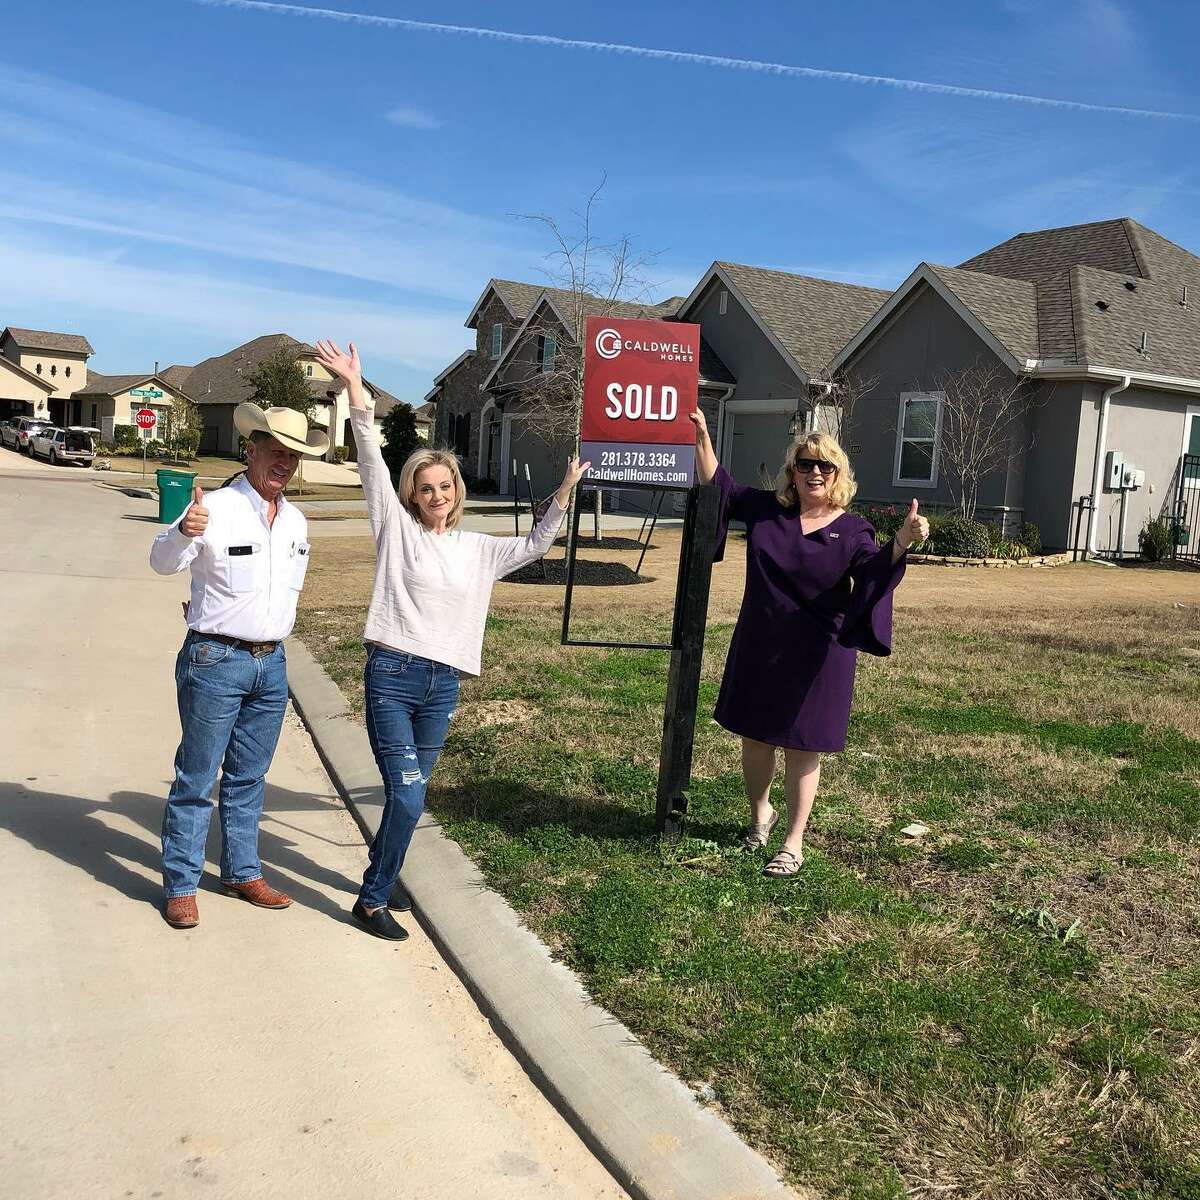 SOLD! The lot has been purchased and construction is set to begin on a new home for Cpl. Sue Downs. The soldier lost both of her legs due to an improvised explosive device (IED) that nearly claimed her life. HelpingAHero.org has awarded her a modified home in the Cypress area.